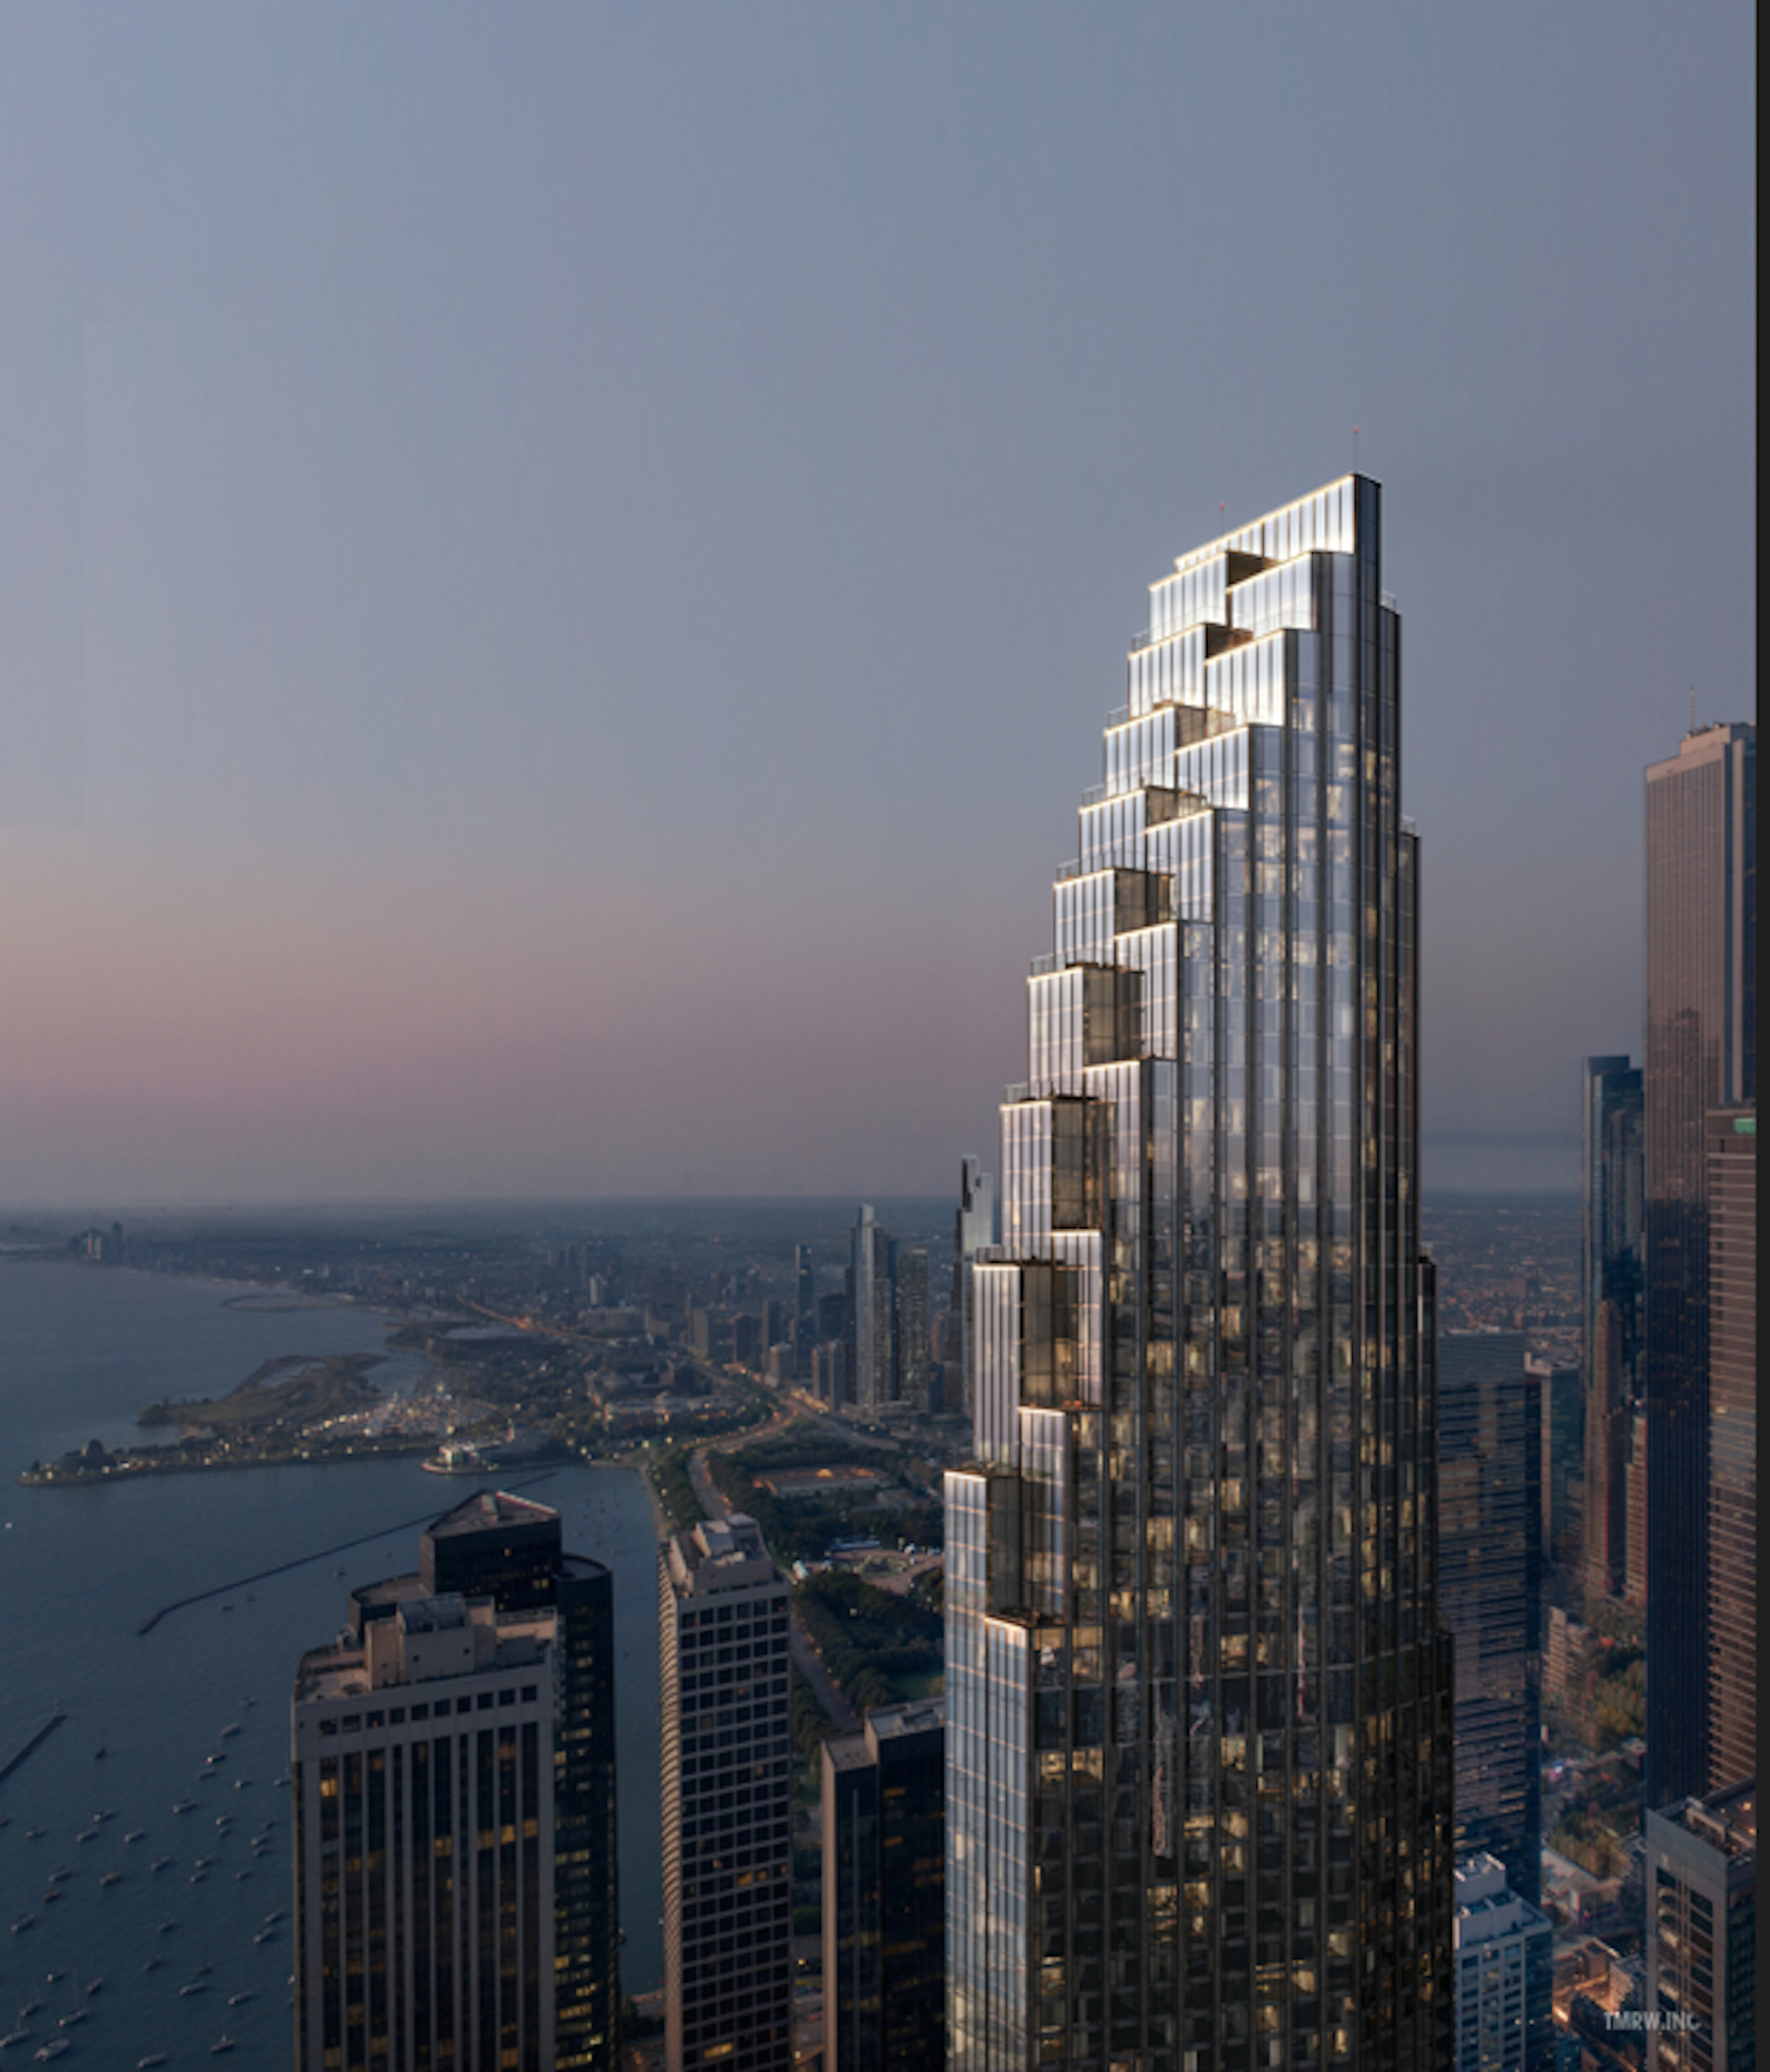 Chicago’s long-vacant Spire site will be home to the two-tower 400 Lake Shore residential development, by Related Midwest and SOM - Rendering courtesy Related Midwest, Skidmore Owings Merrill